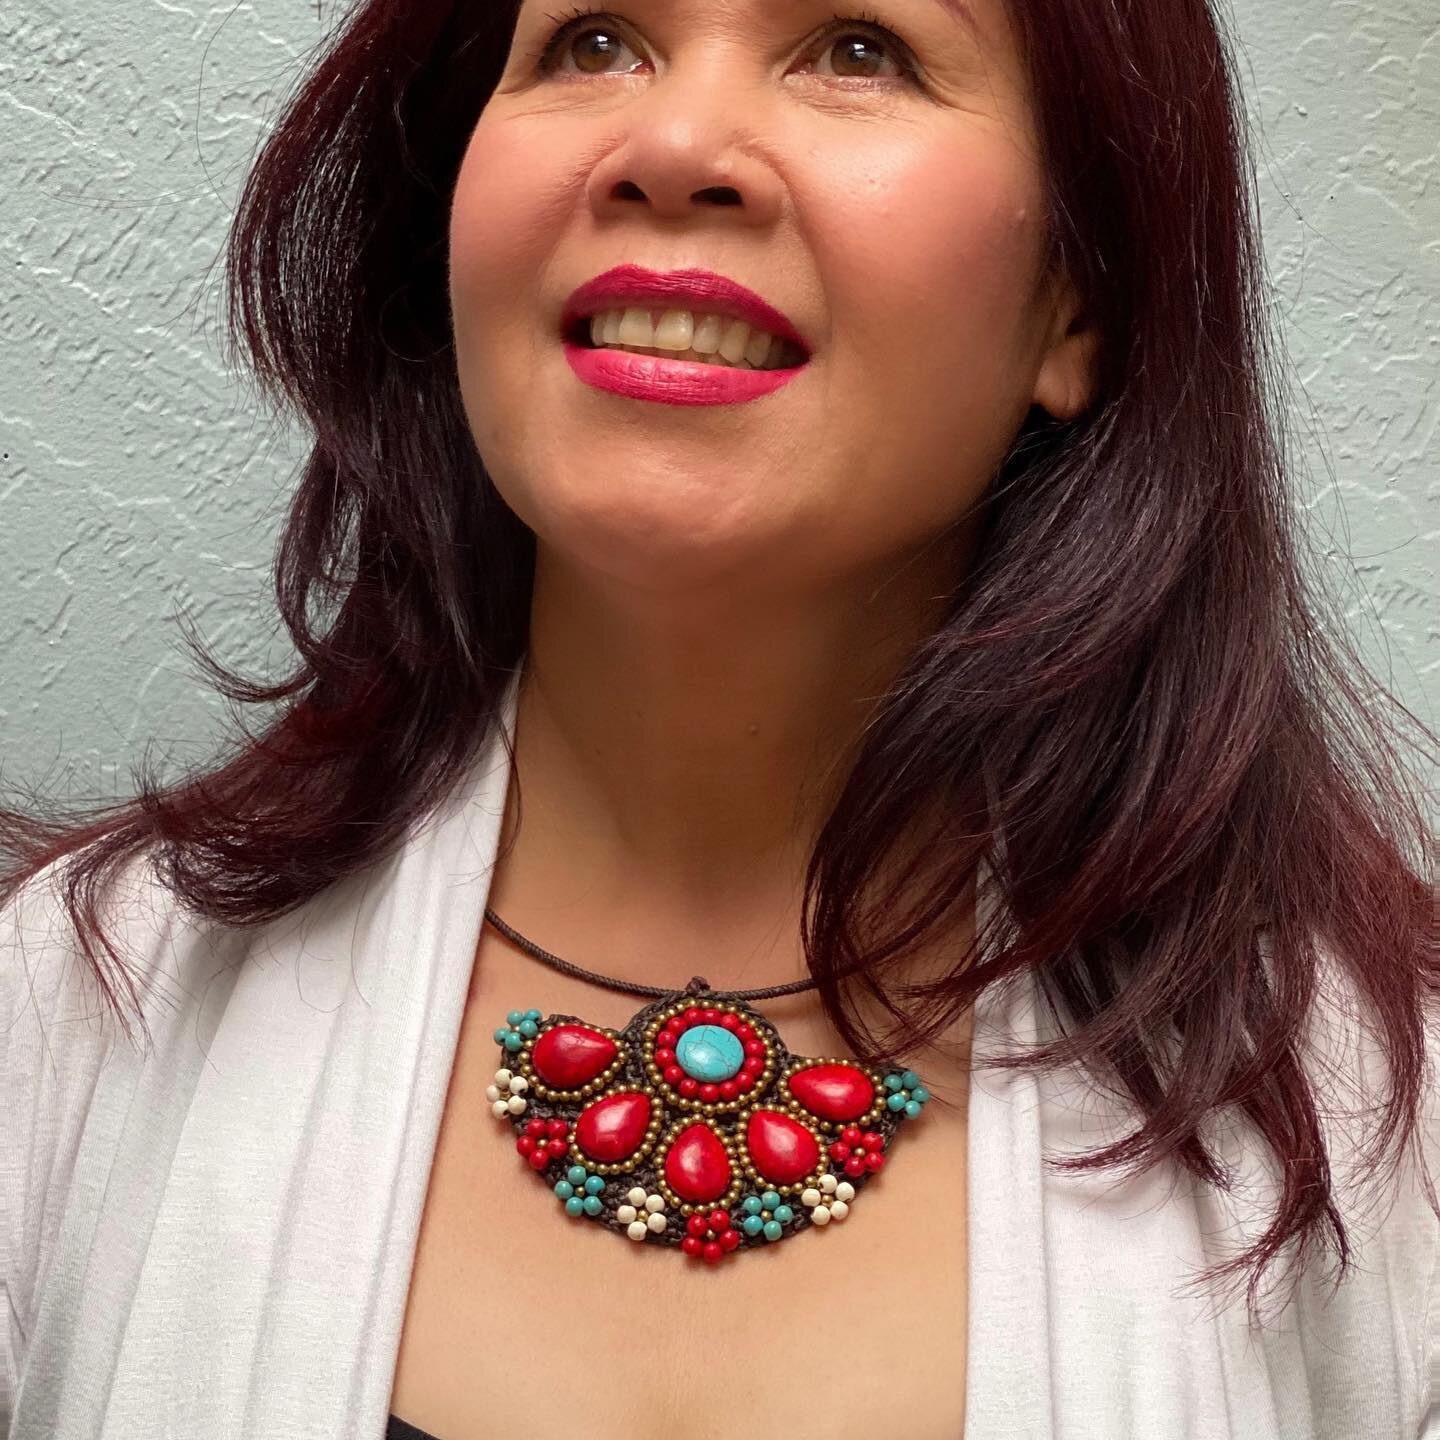 Handmade Multicolor Simulated Turquoise-White-Reconstructed Red-Coral Floral with Cotton Wax Rope Choker Necklace #necklaces #handmade #turquoise #white #redcoral #floral #choker #cottonwaxrope #fashiondesign #stone #tingsthaiculture #jerwely